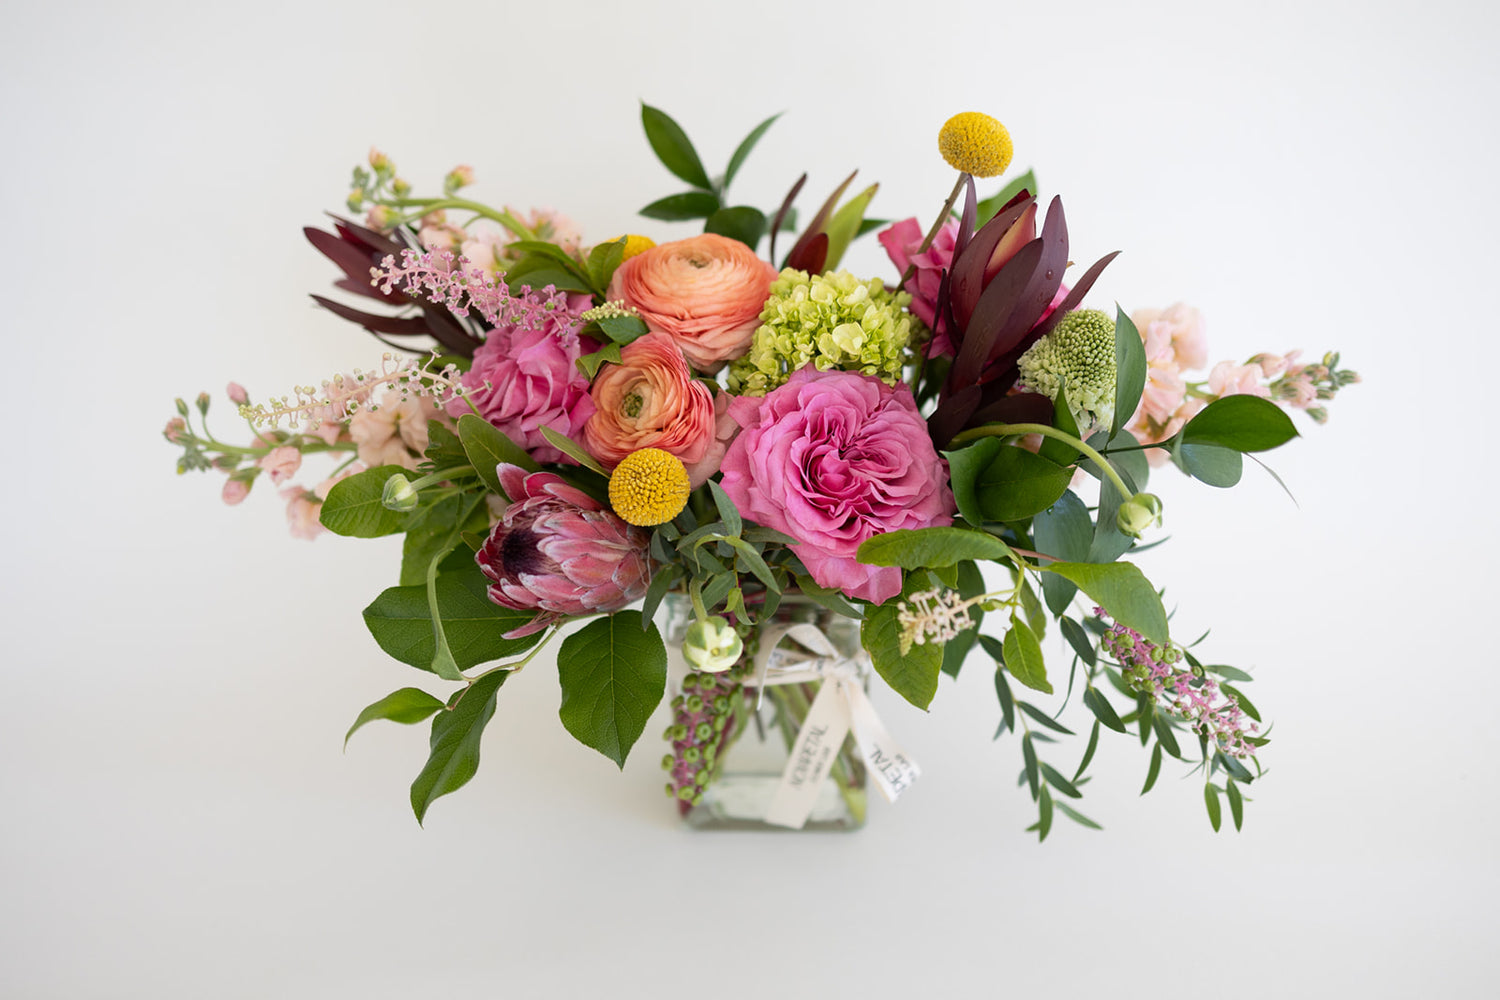 "Stunning pink floral arrangement crafted by NovaPetal Flower Lab, featuring vibrant hues and intricate design to capture the essence of beauty and brightness. offering same day delivery in phoenix. 